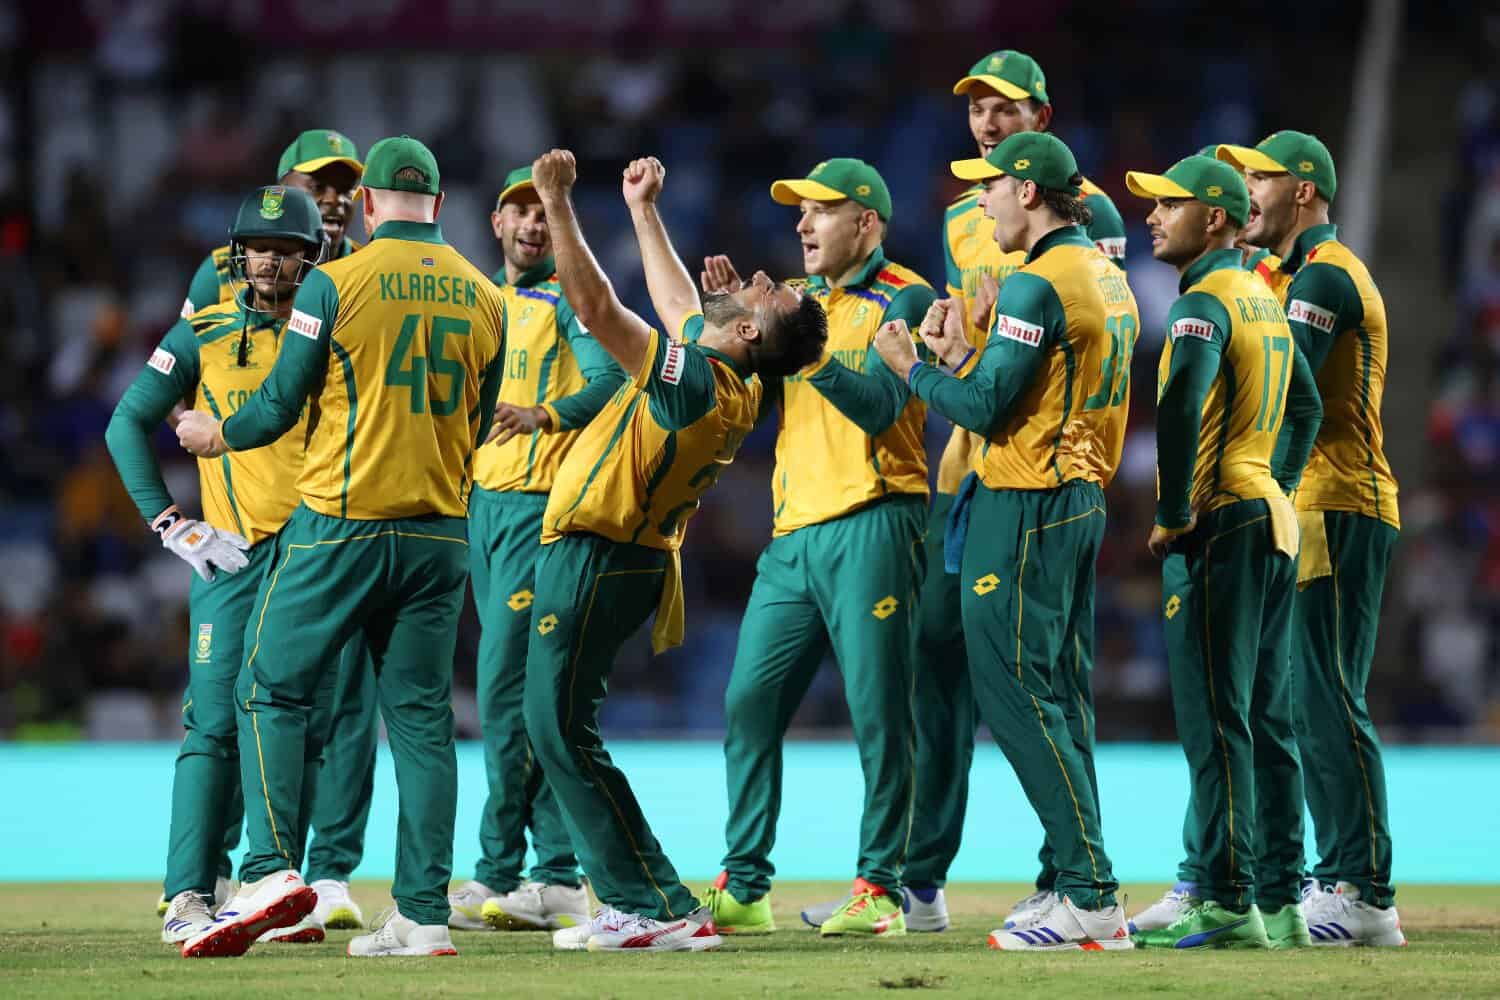 The Proteas breeze past Afghanistan to book a spot in the ICC T20 Final